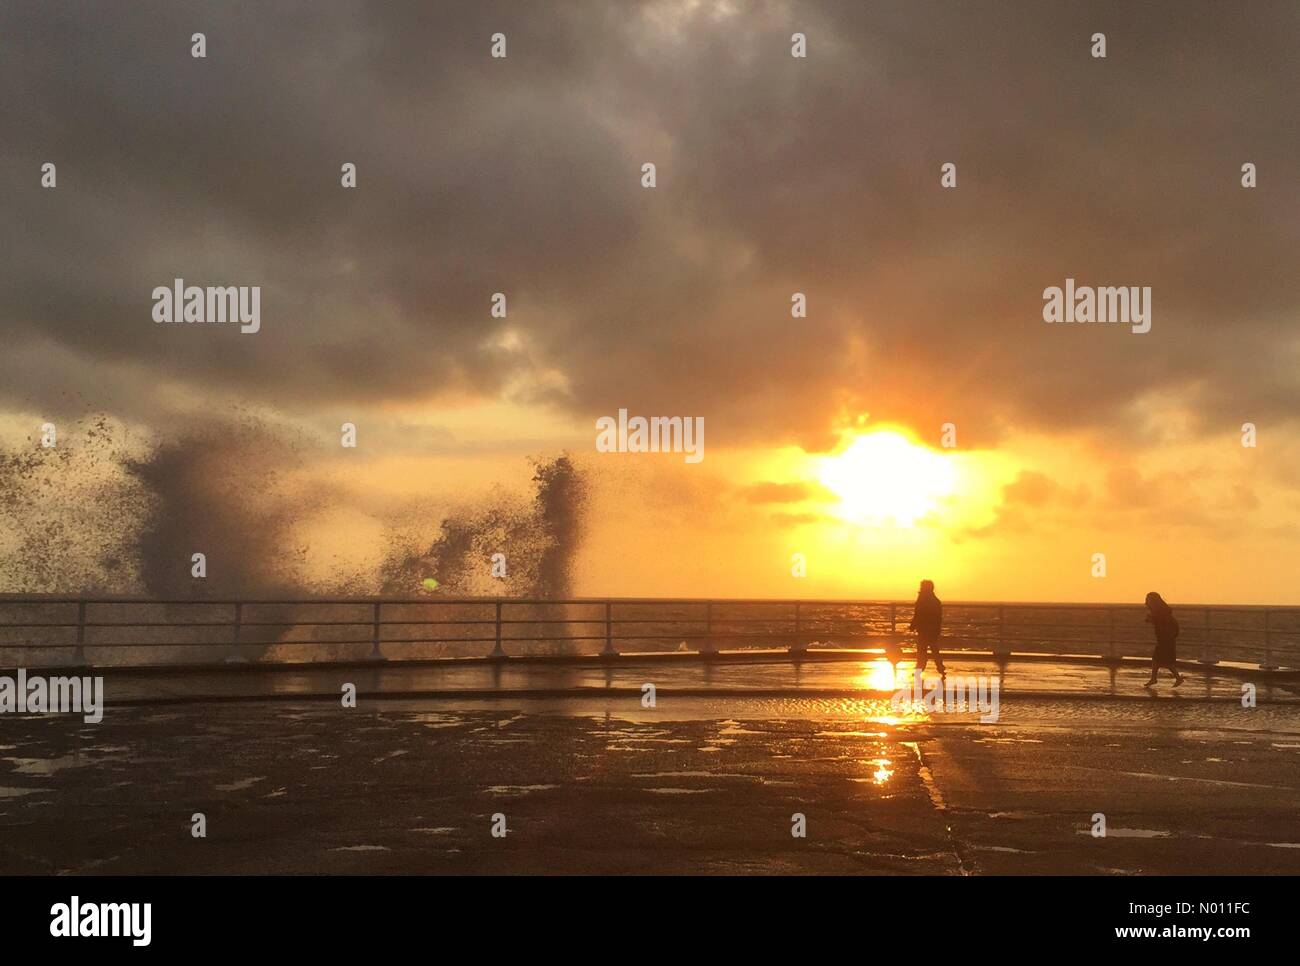 Aberystwyth Wales UK. Sunday 02 June 2019. Children silhouetted as they play in the spray of crashing waves on Aberystwyth promenade at sunset on a windy evening Credit: keith morris1/StockimoNews/Alamy Live News Stock Photo